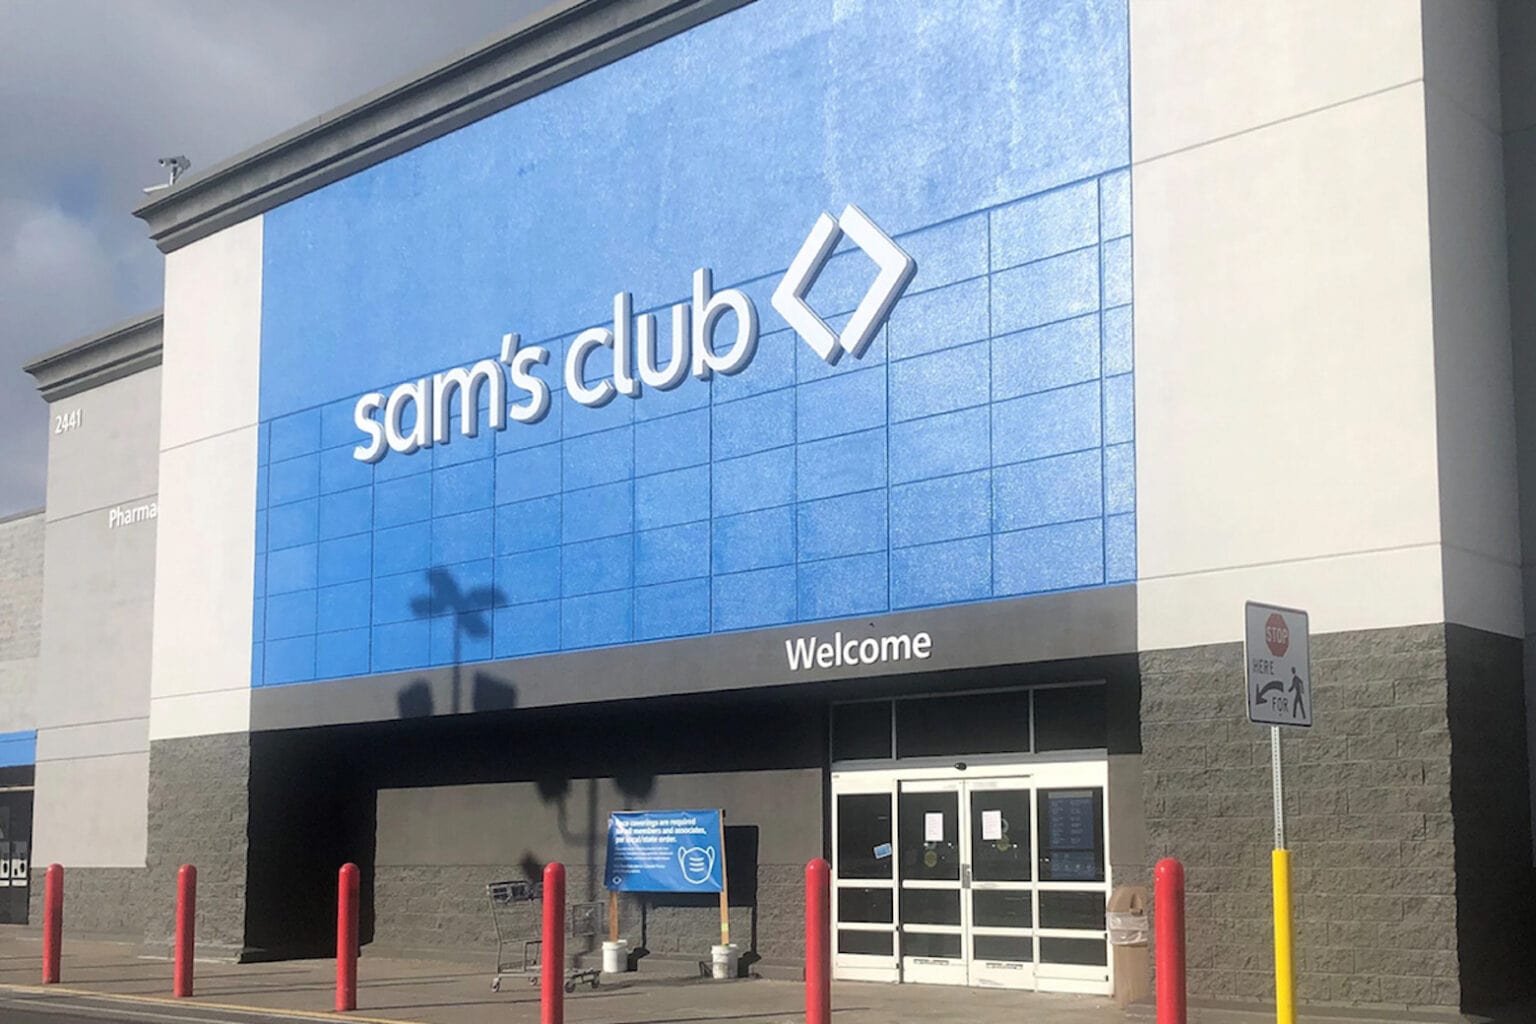 A Sam's Club membership is now only $35, and could help you save on groceries and more.